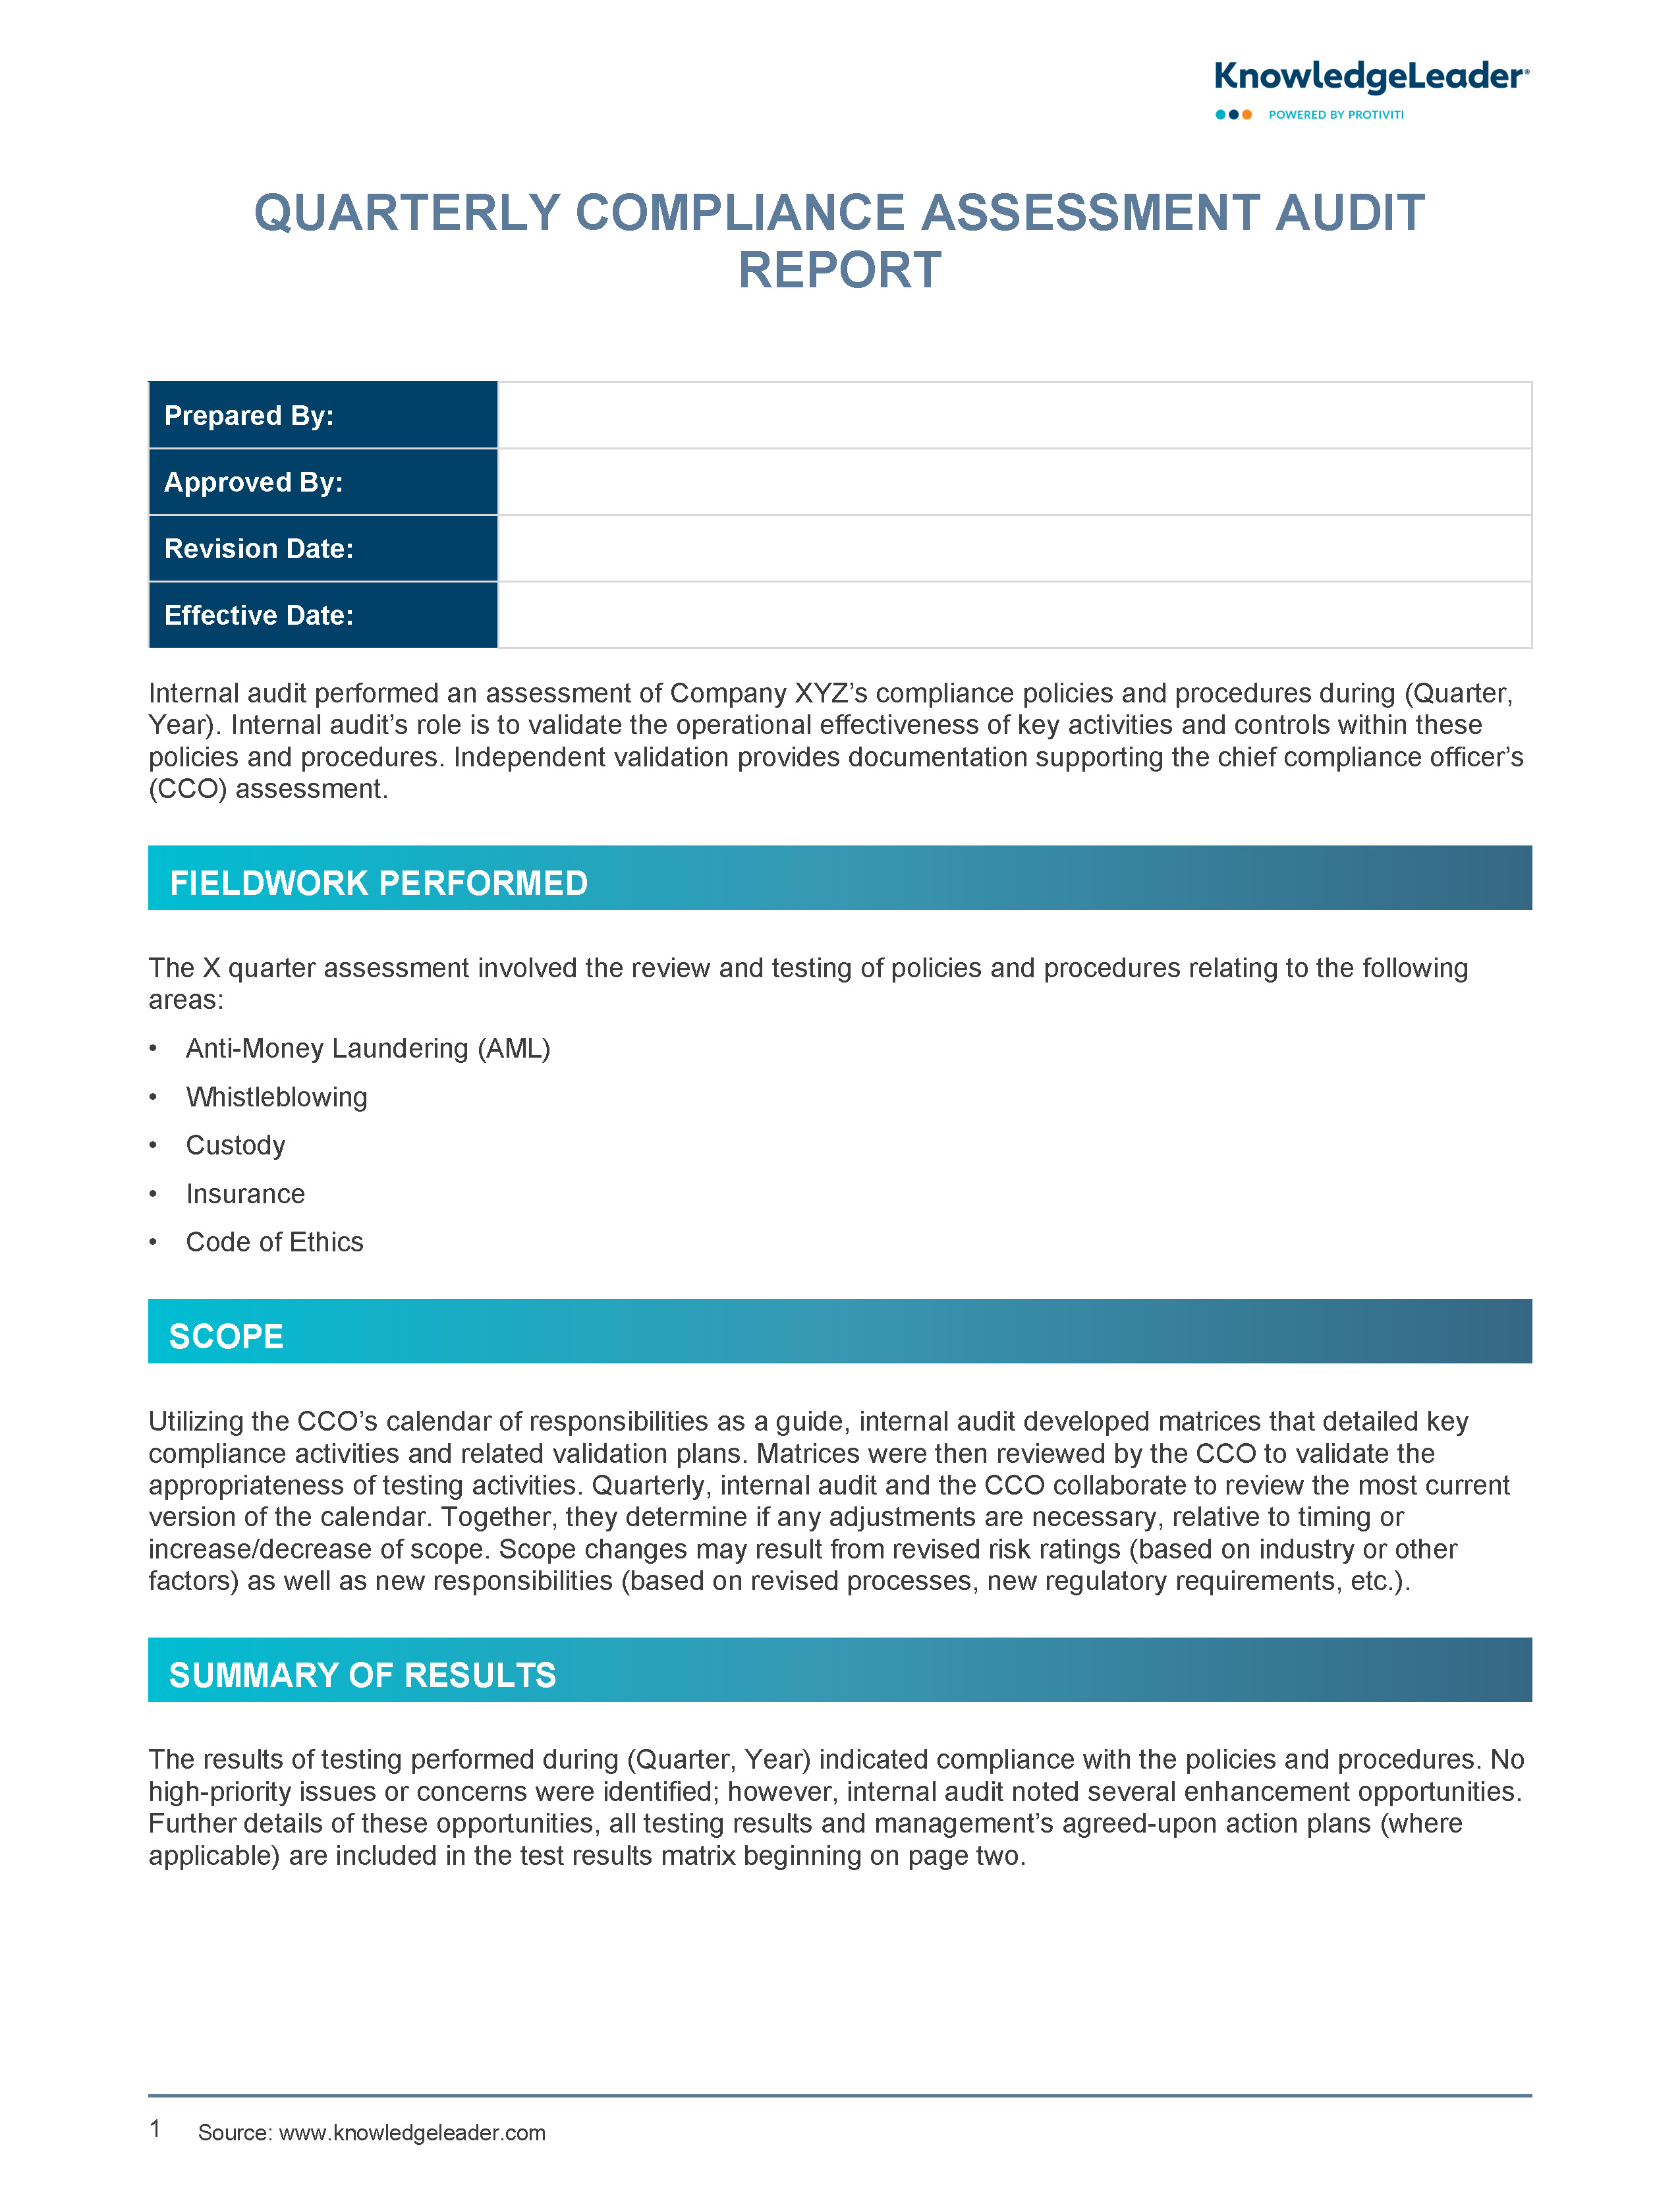 Screenshot of the first page of Quarterly Compliance Assessment Report